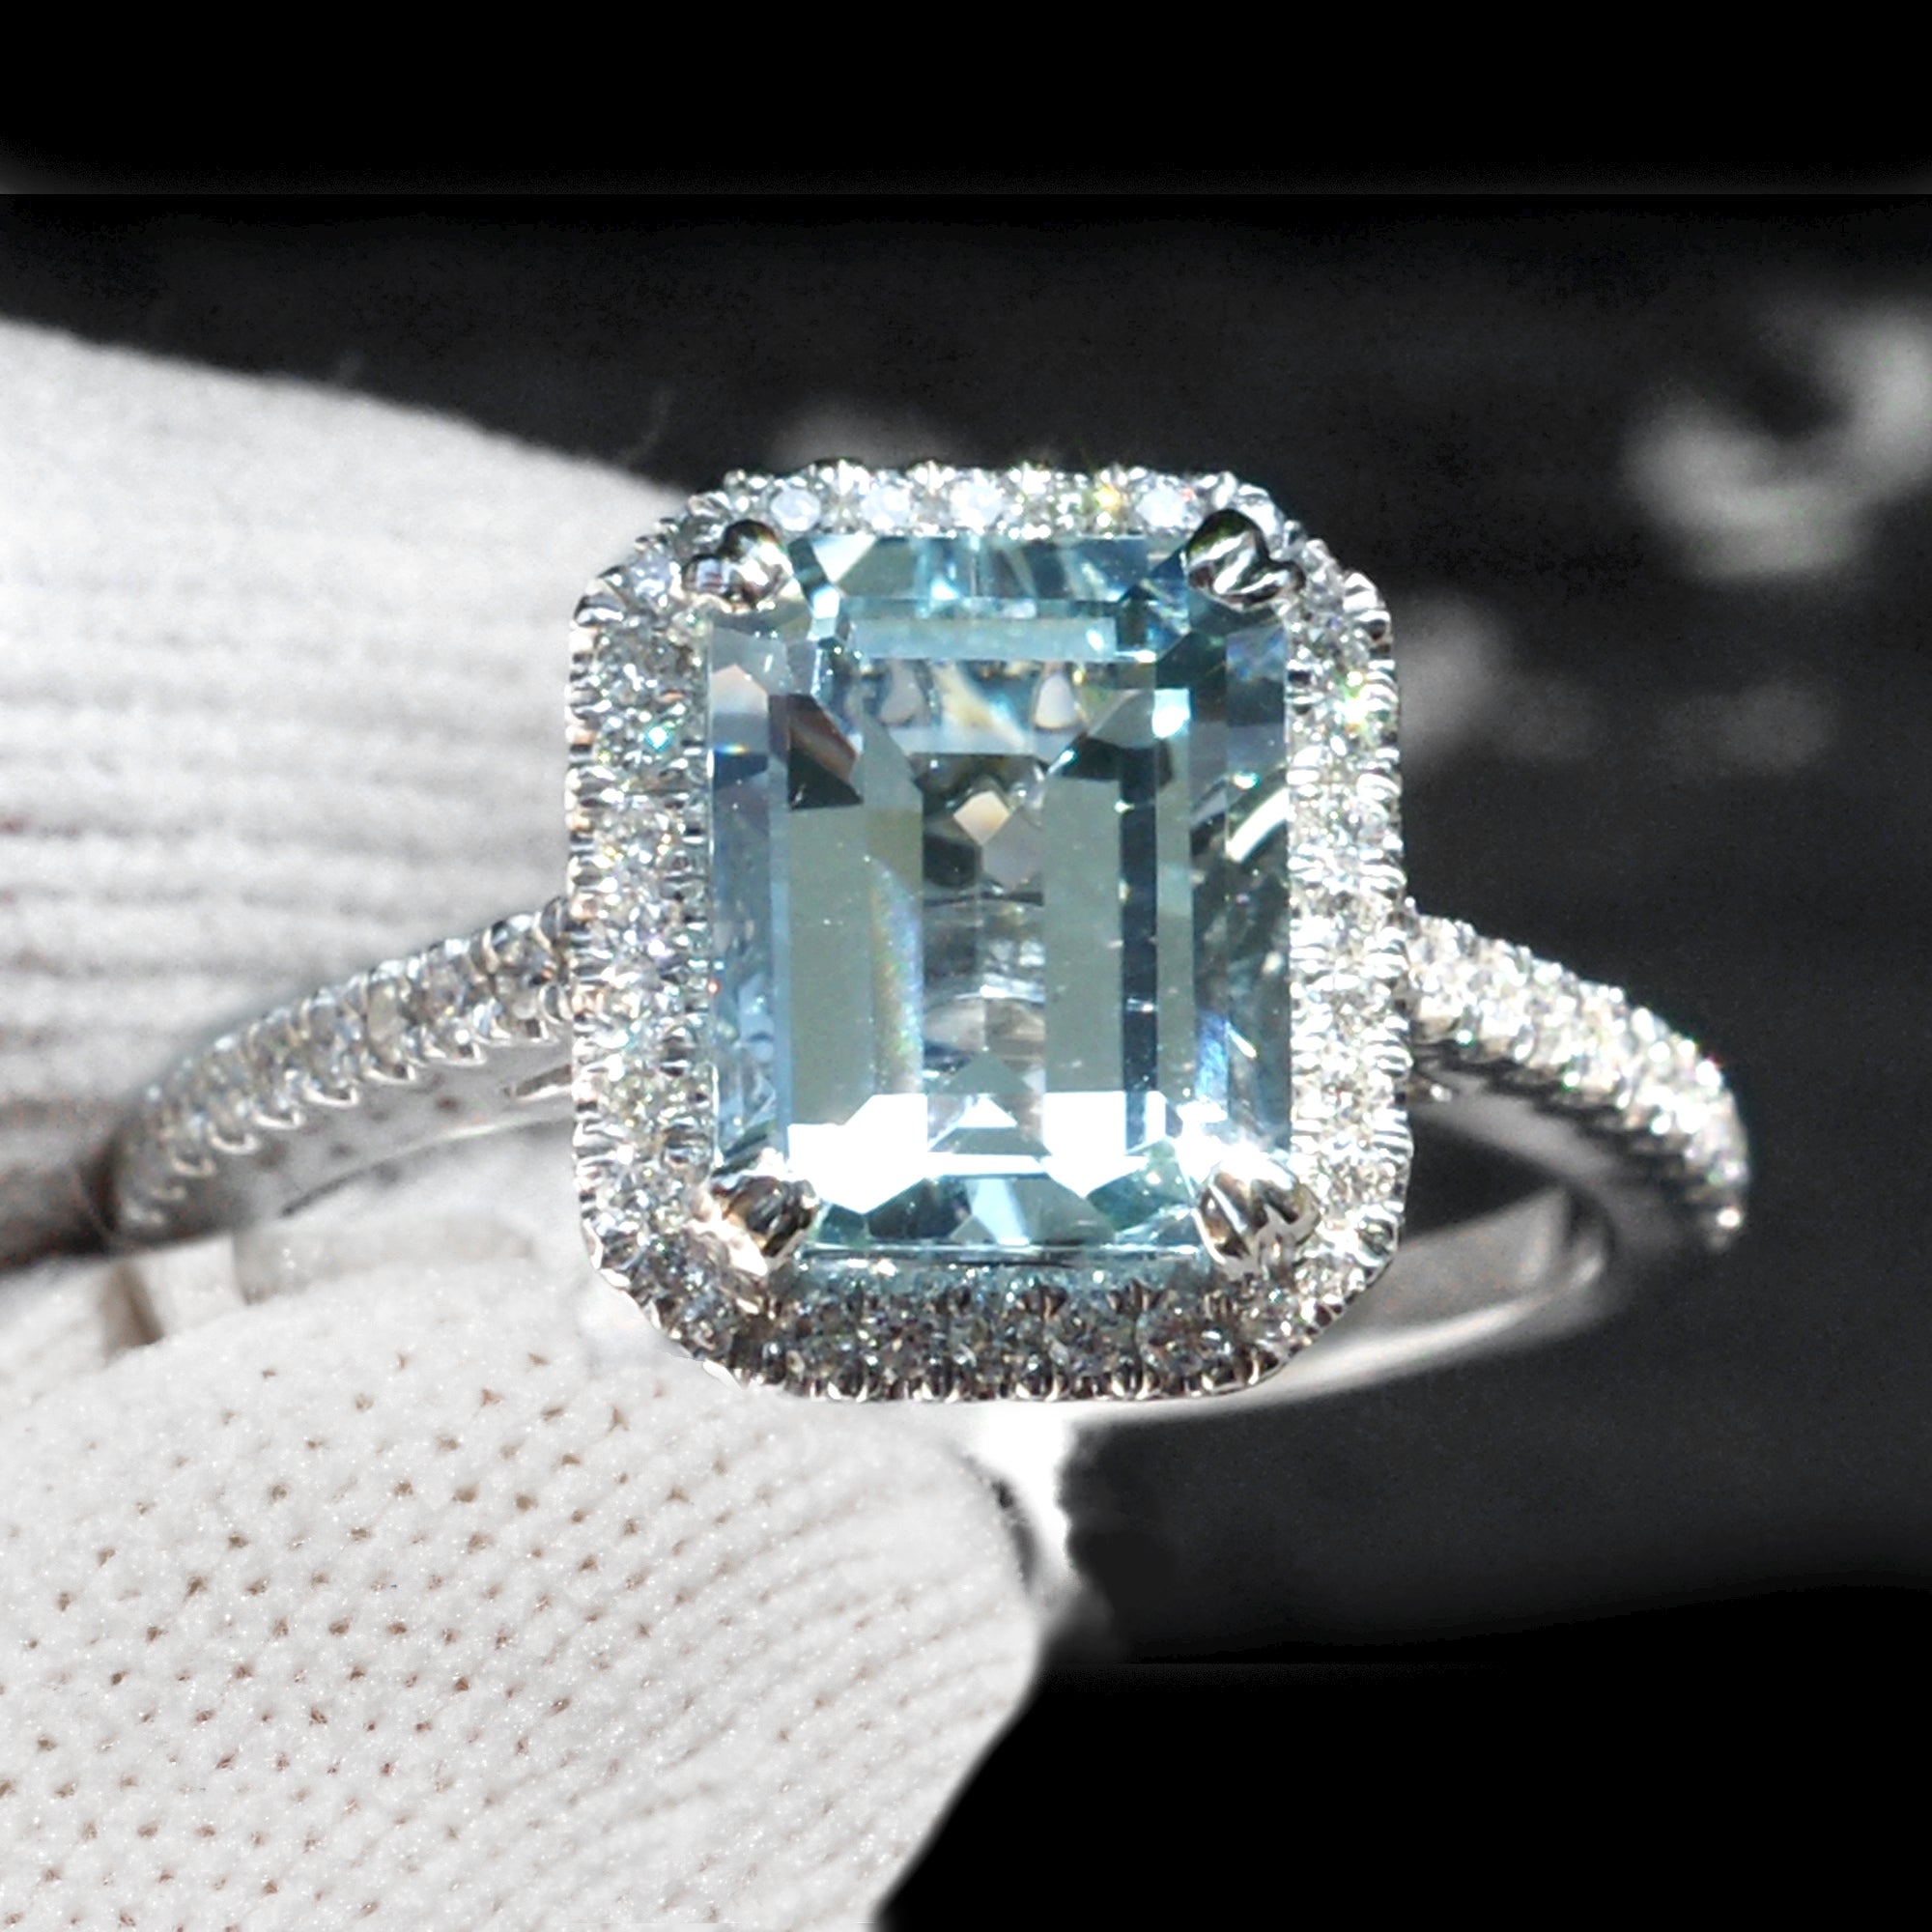 Emerald step cut aquamarine ring with diamond halo and band in white gold